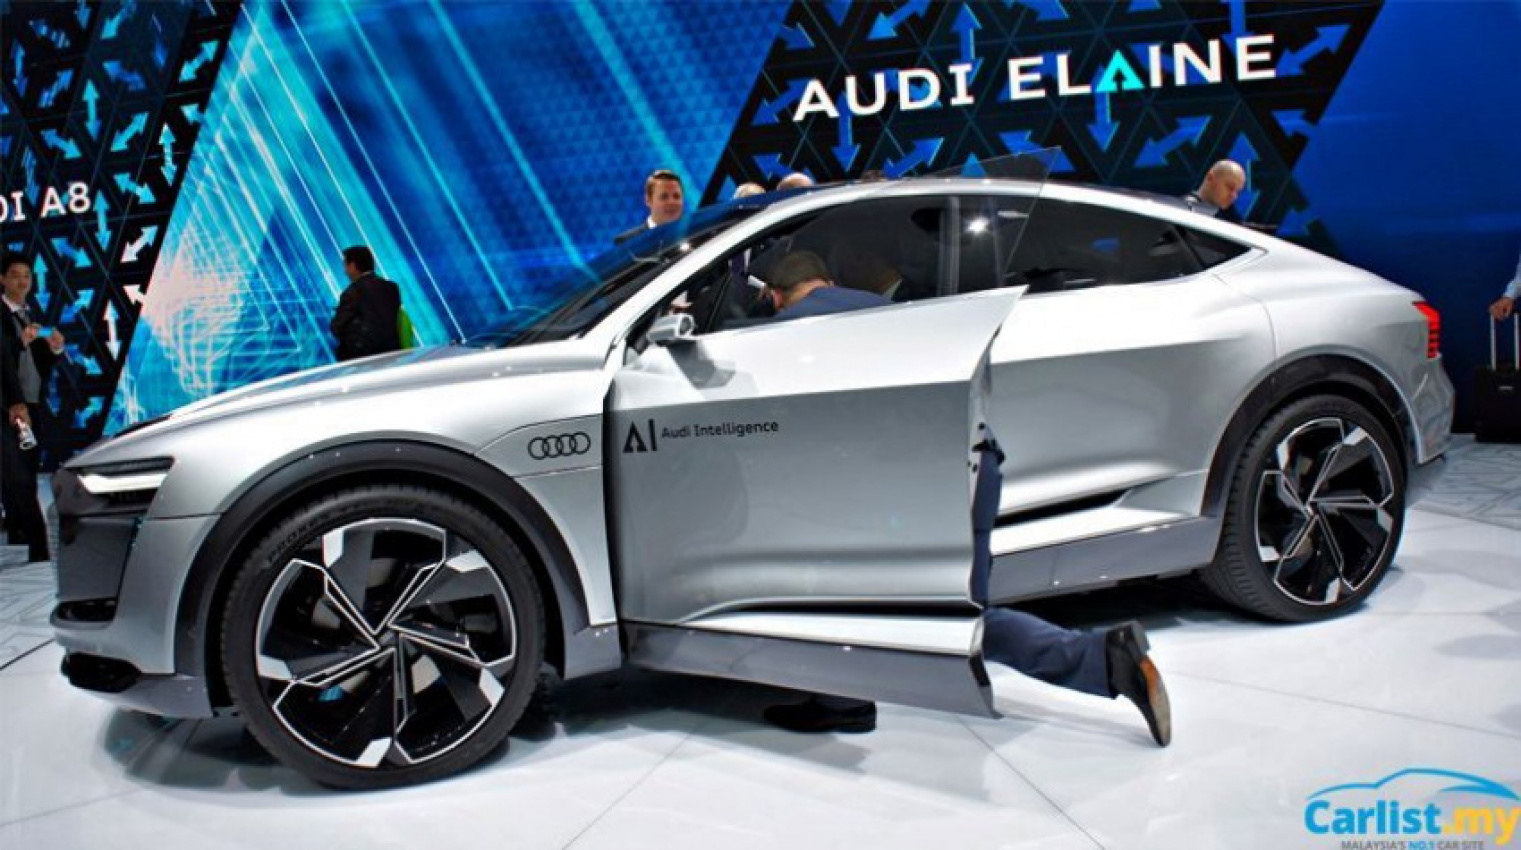 audi, autos, cars, audi elaine, auto news, elaine, frankfurt, frankfurt 2017, frankfurt 2017: audi elaine concept is so clever it can even monitor your health condition